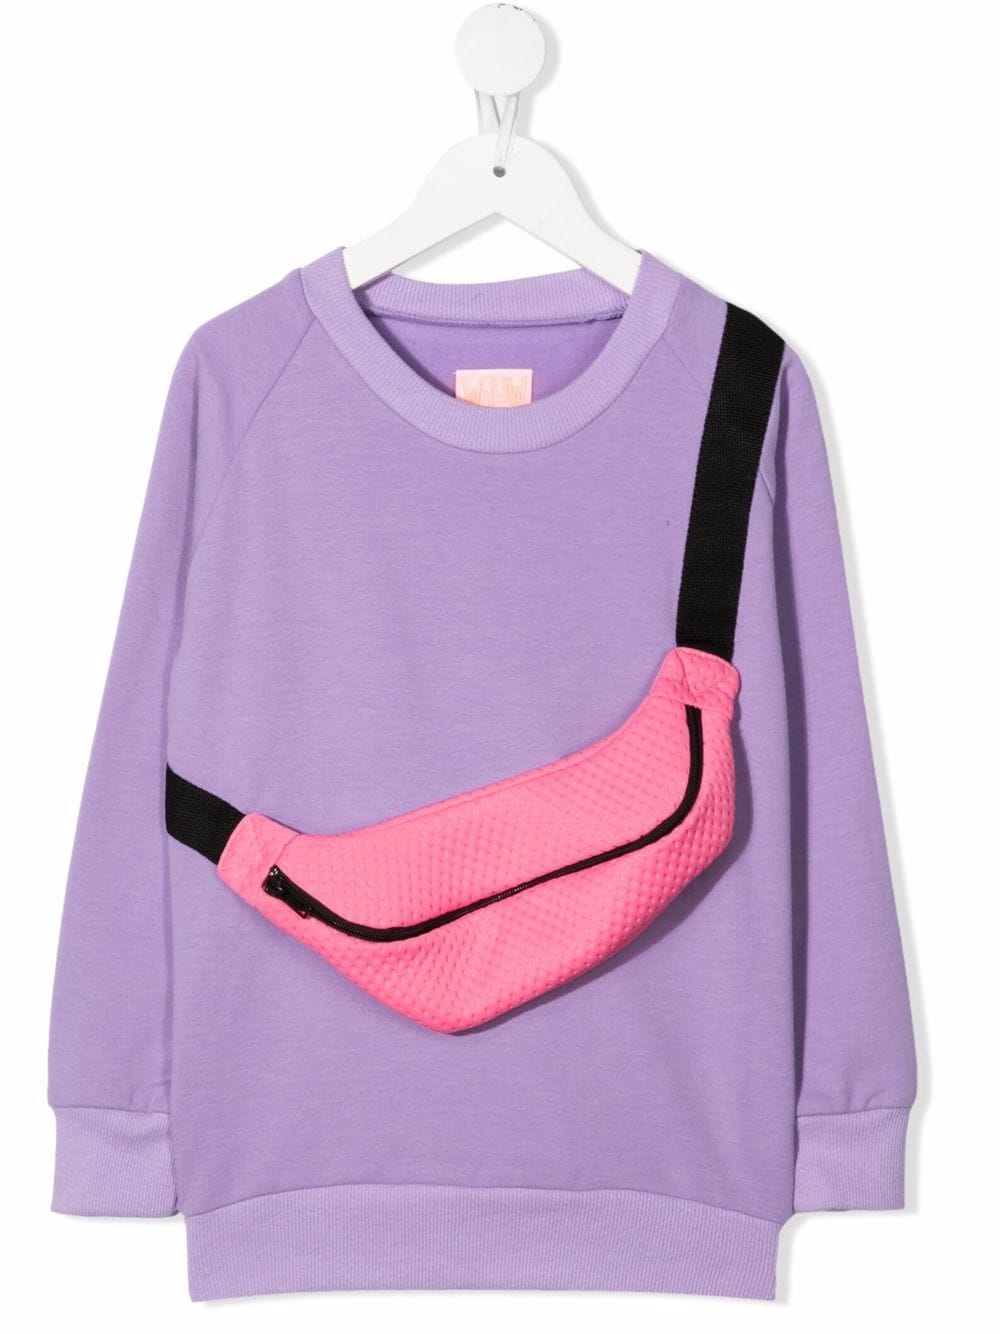 WAUW CAPOW by BANGBANG Candy carrier sweater - Purple von WAUW CAPOW by BANGBANG